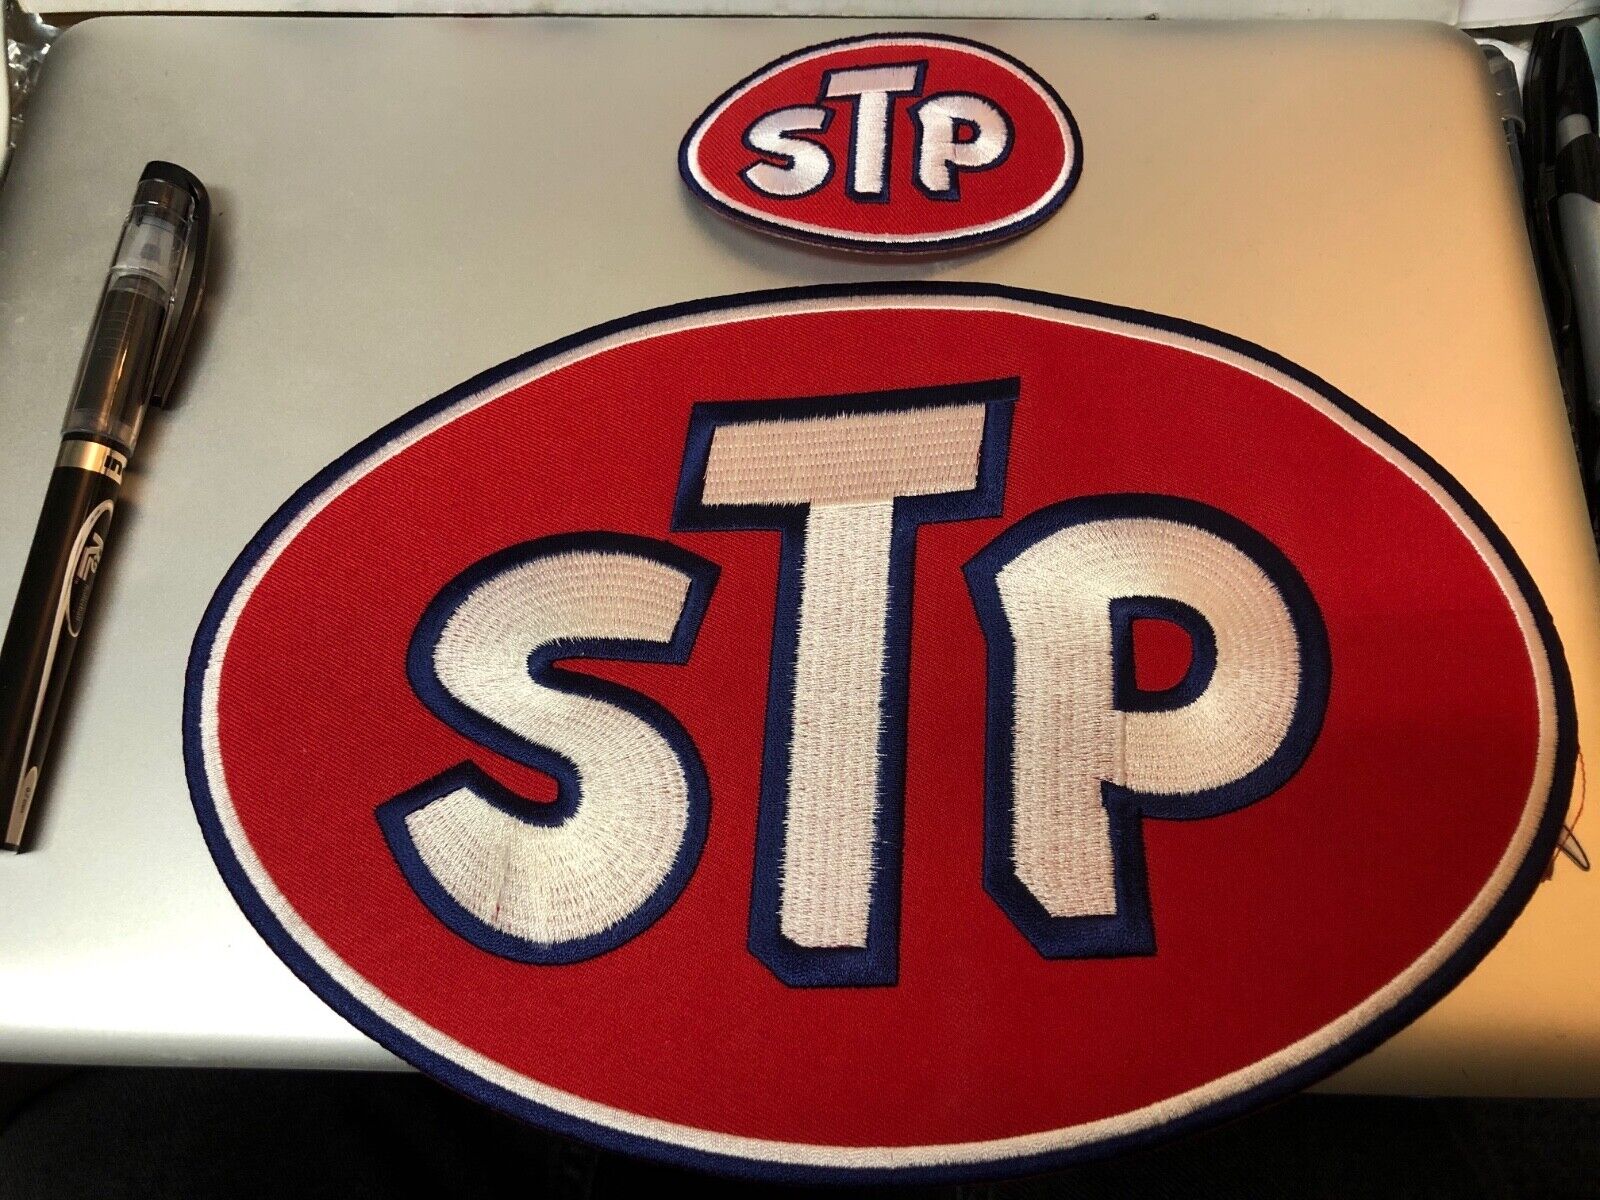 STP  OIL TREATMENT  ICONIC   LARGE & SMALL  SUPER COOL IRON ON PATCHES.